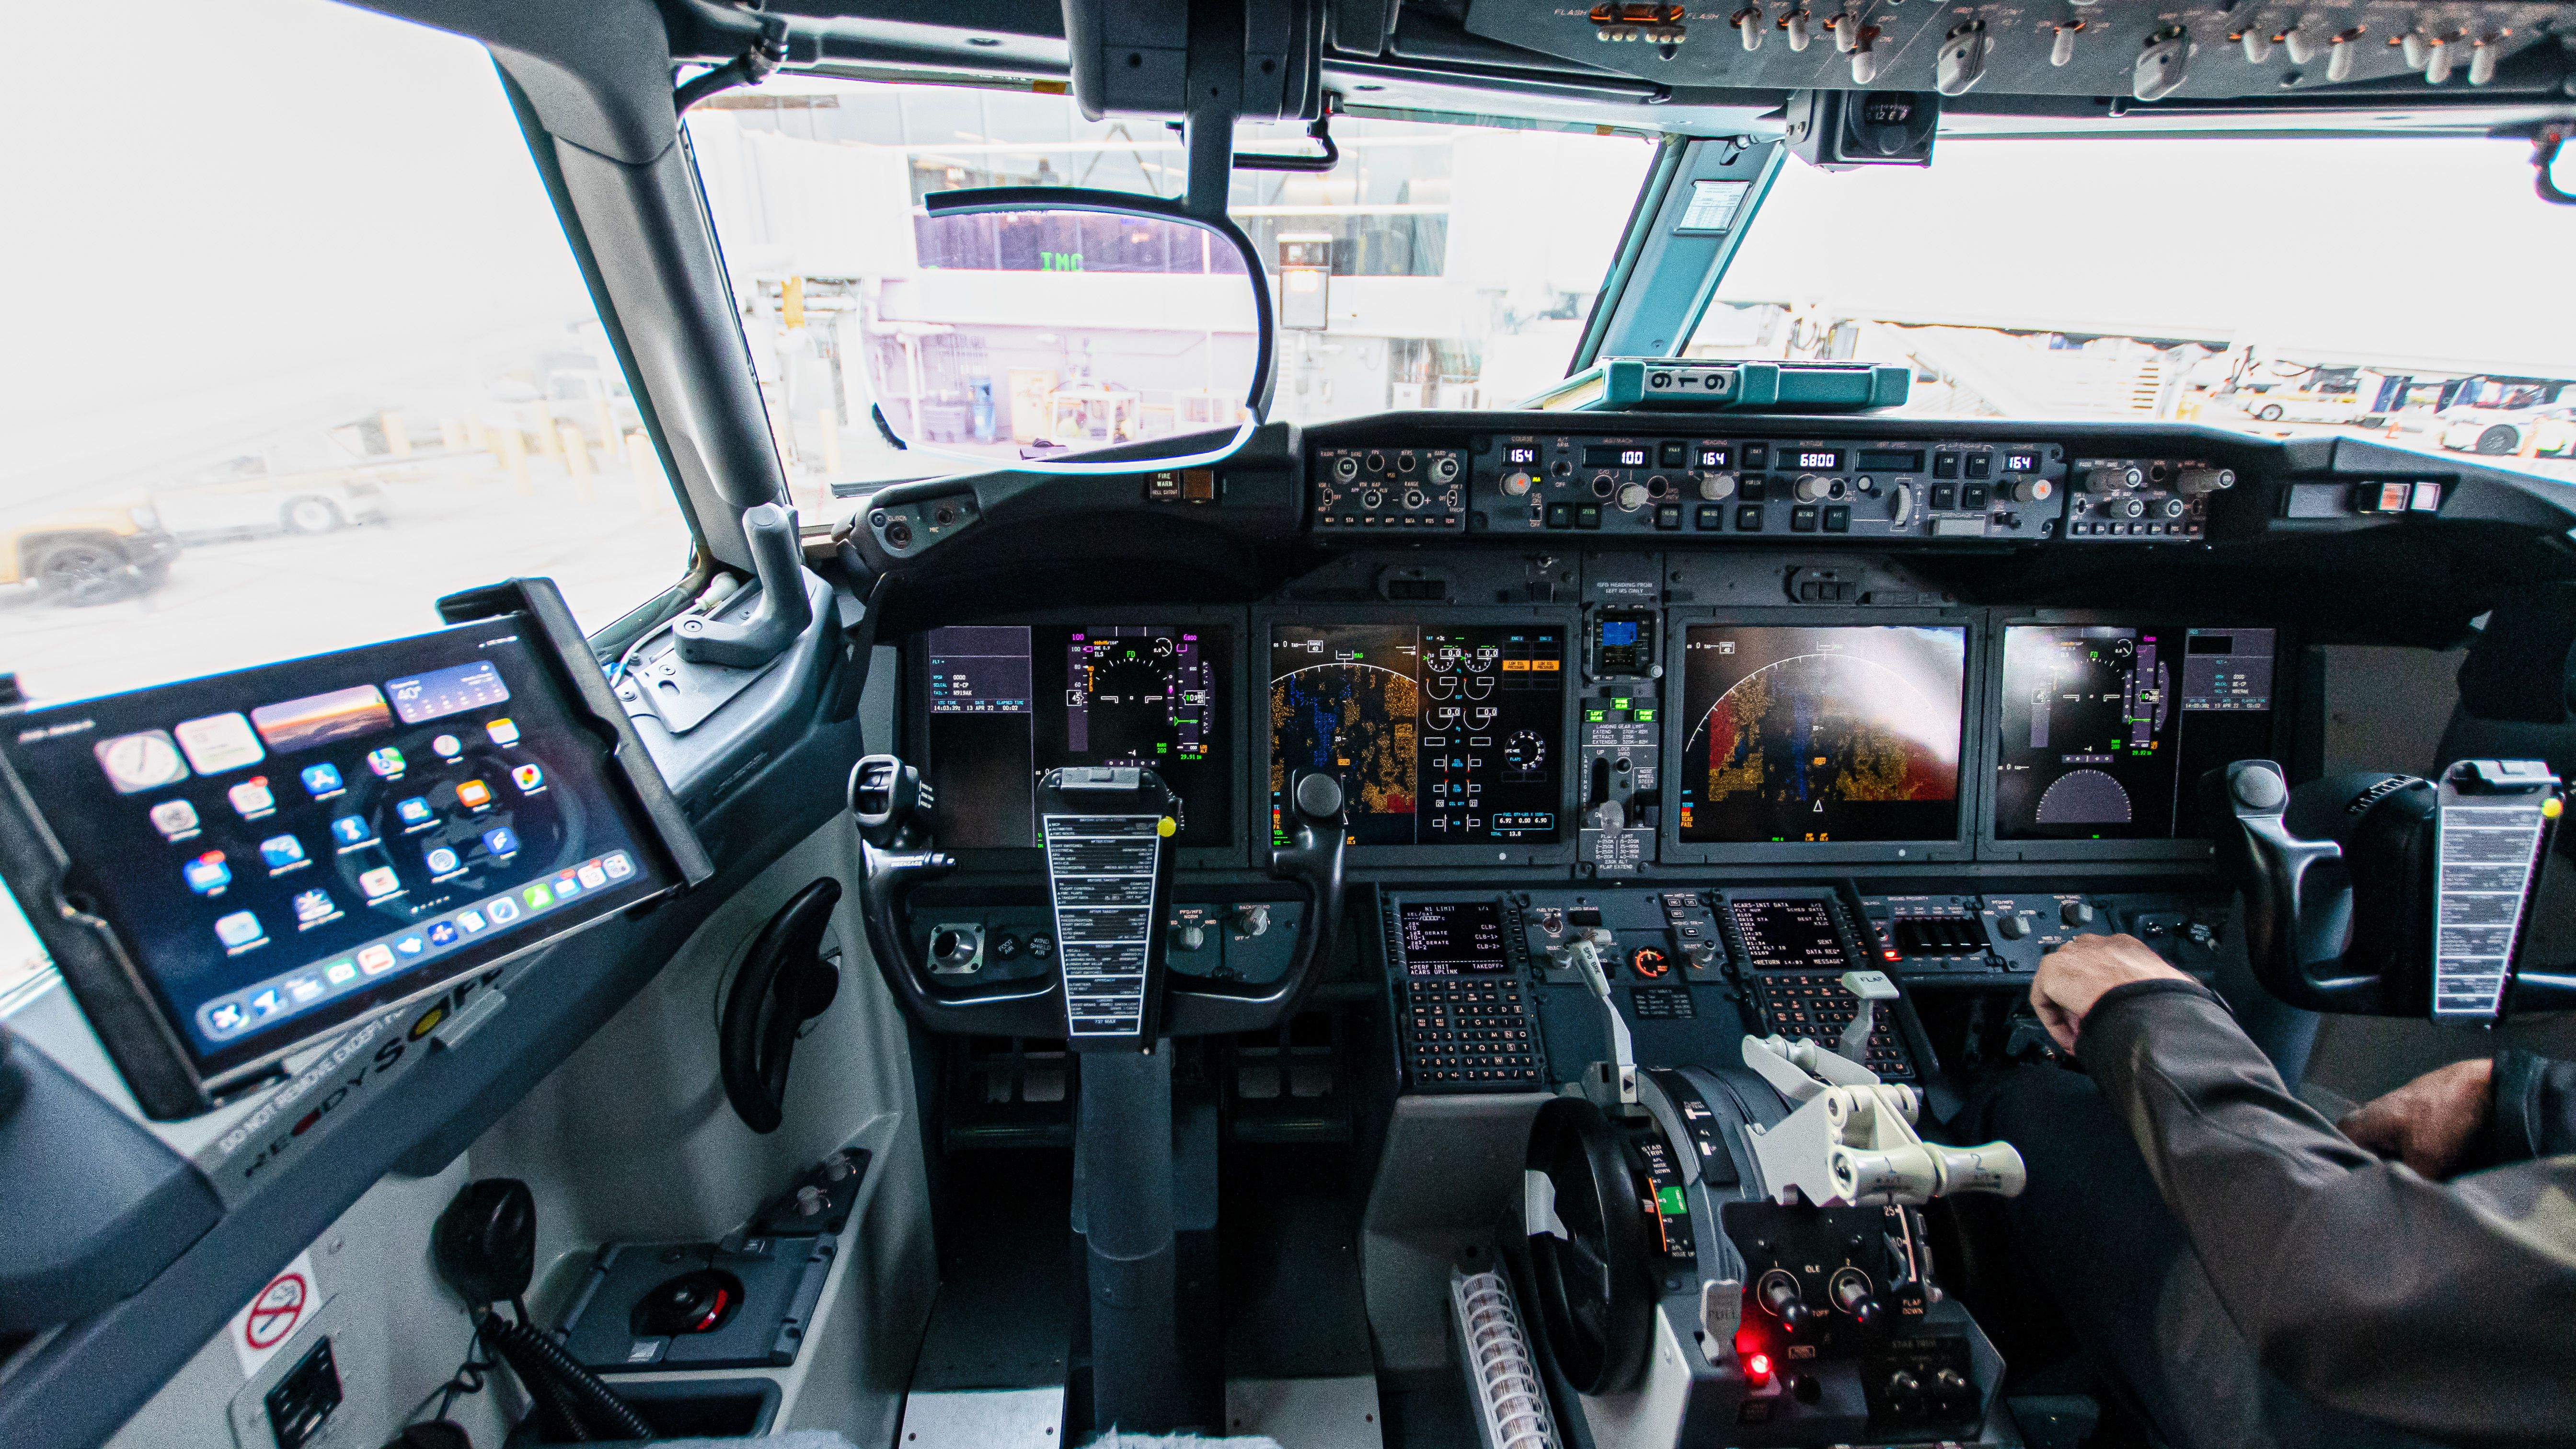 BOEING 737-9 MAX COCKPIT in 16-9 WIDESCREEN